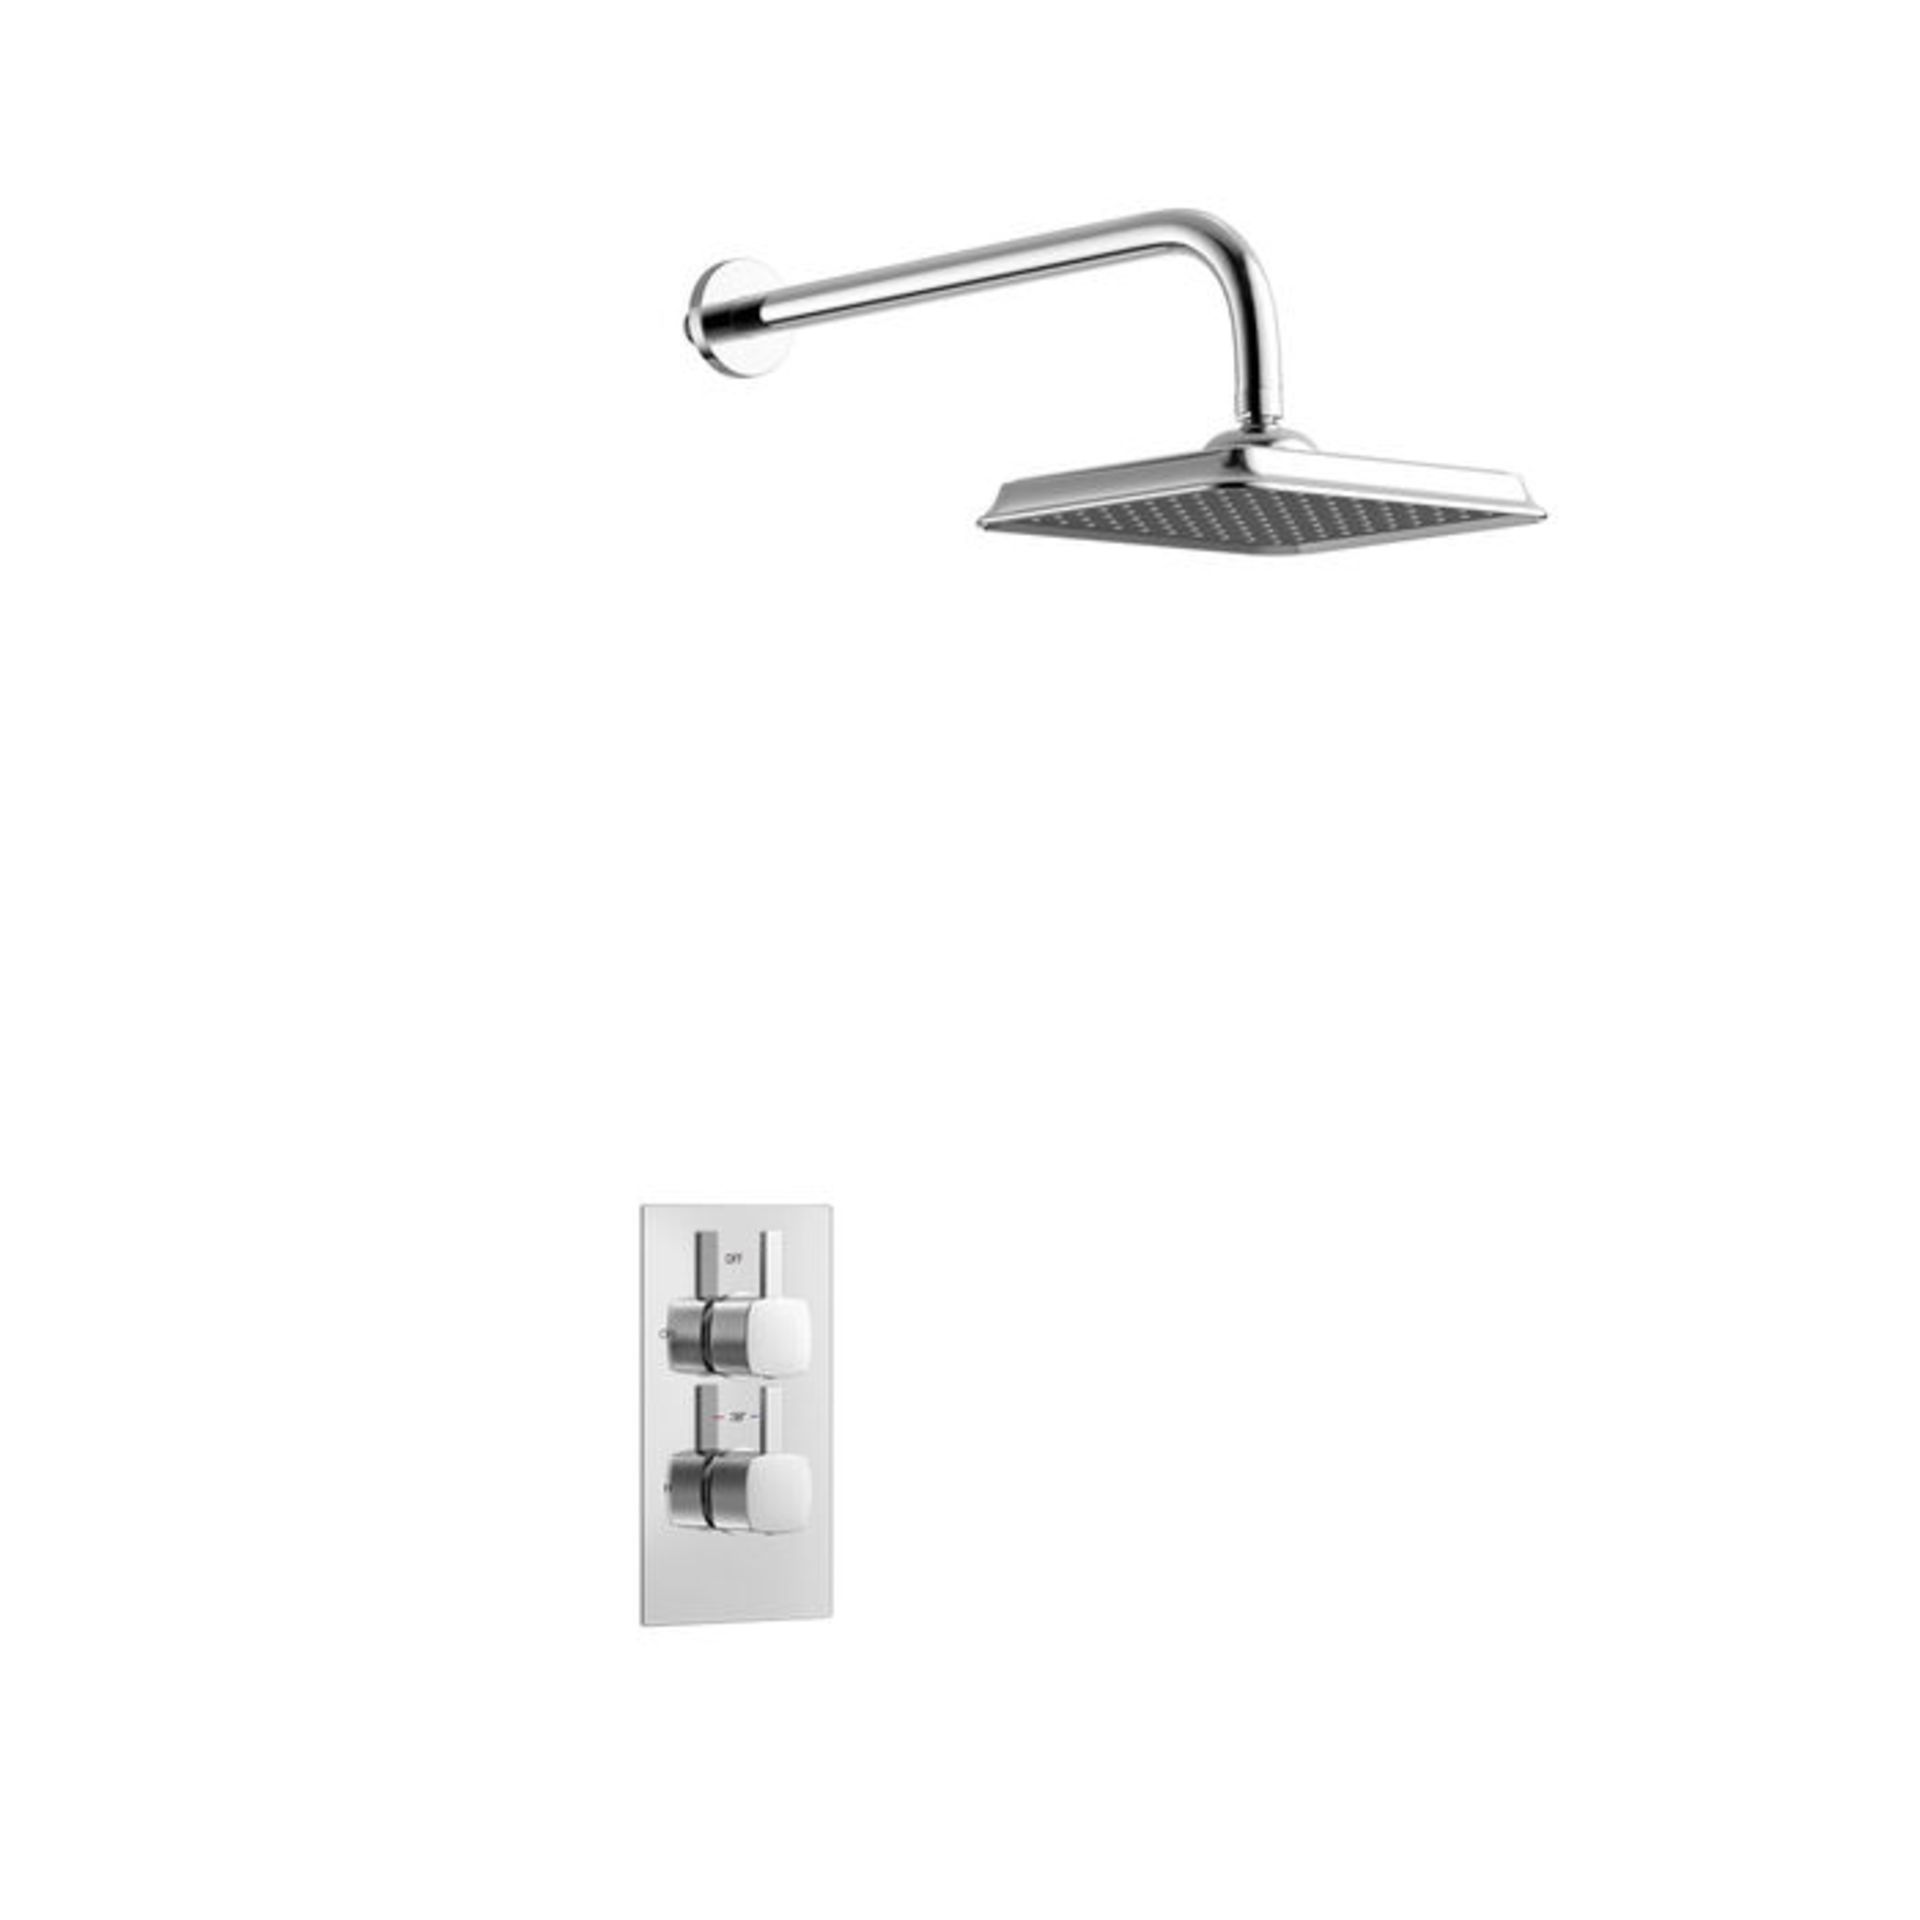 (TT201) Square Thermostatic Shower & Medium Head. Enjoy the minimalistic aesthetic of a conce...